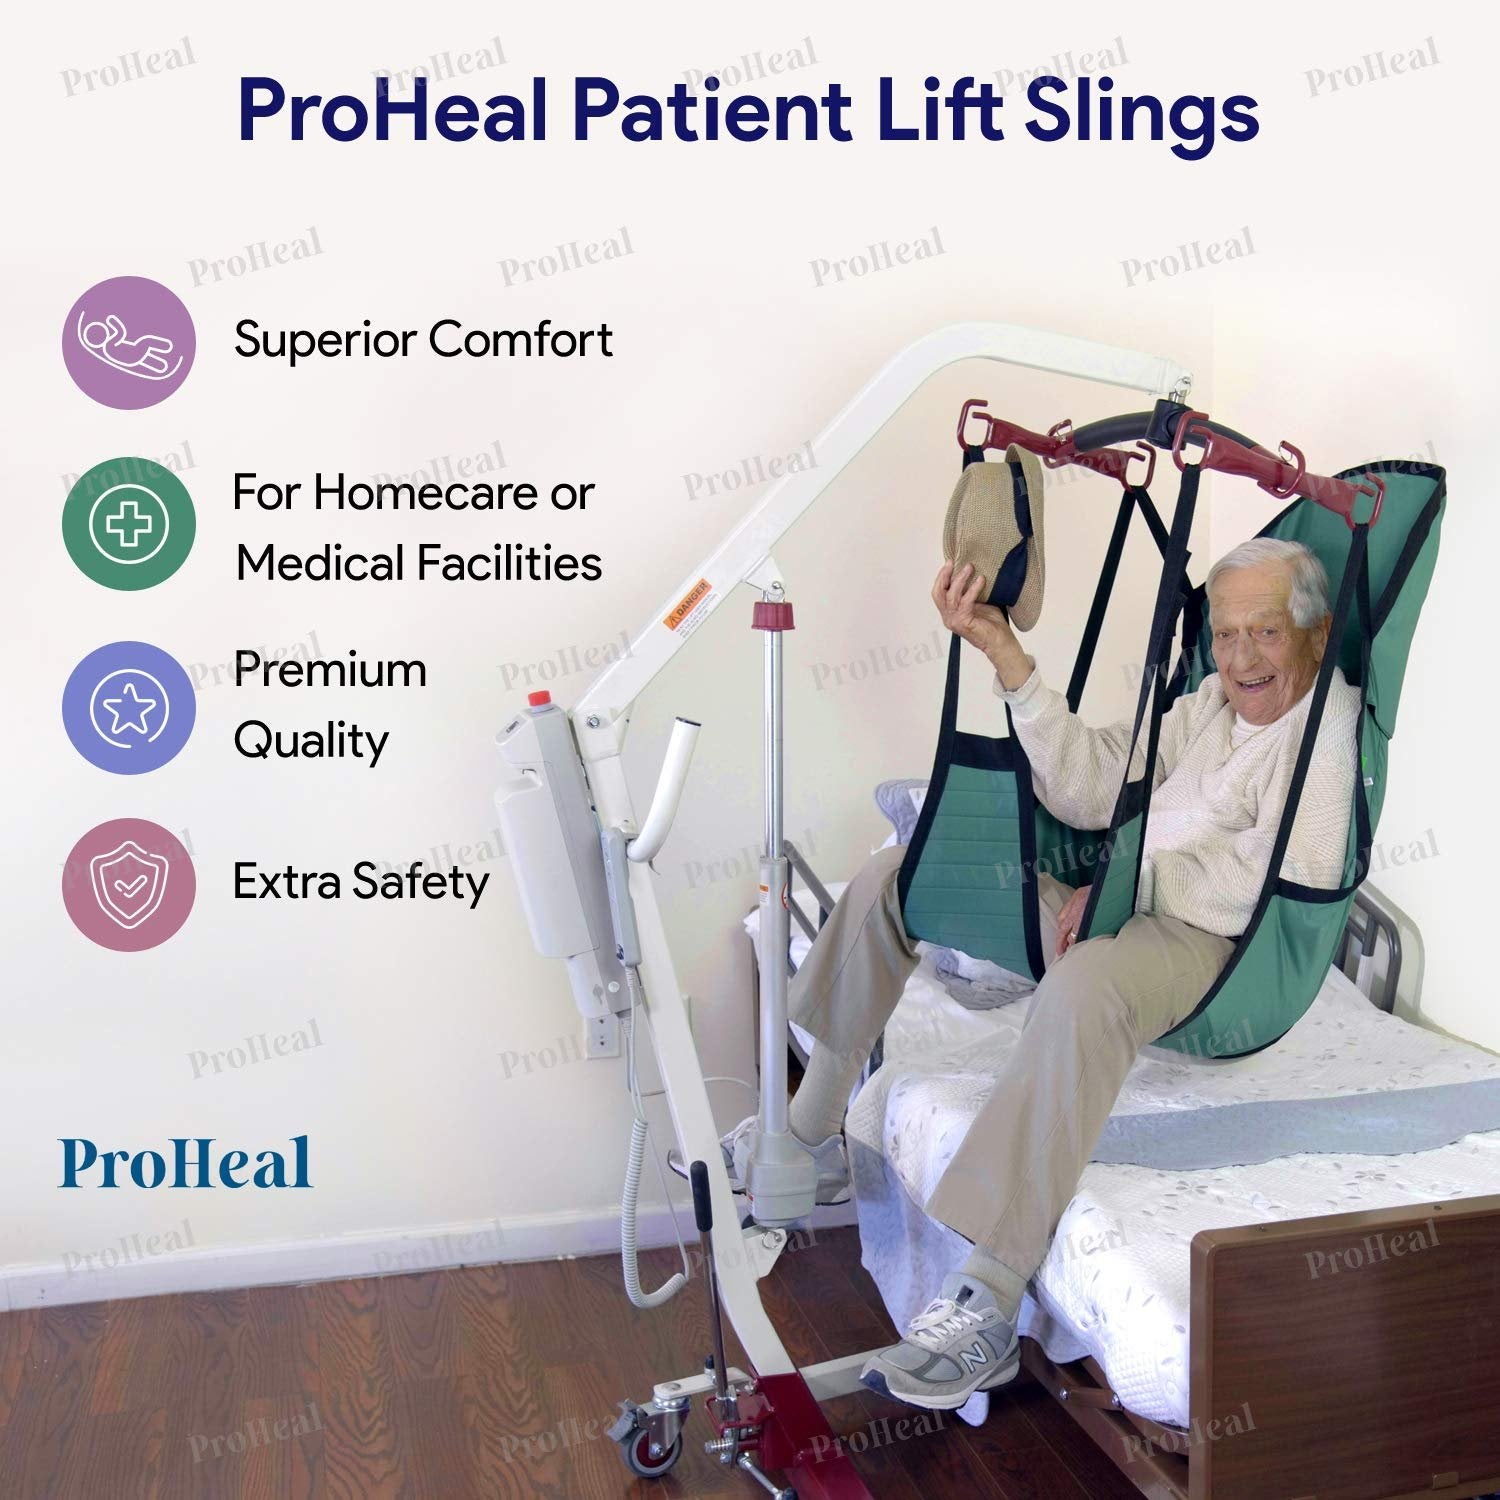 ProHeal Universal Full Body Mesh Lift Sling, XX Large, 54"L x 43" - Polyester Slings for Patient Lifts - Compatible with Hoyer, Invacare, McKesson, Drive, Lumex, Medline, Joerns and More